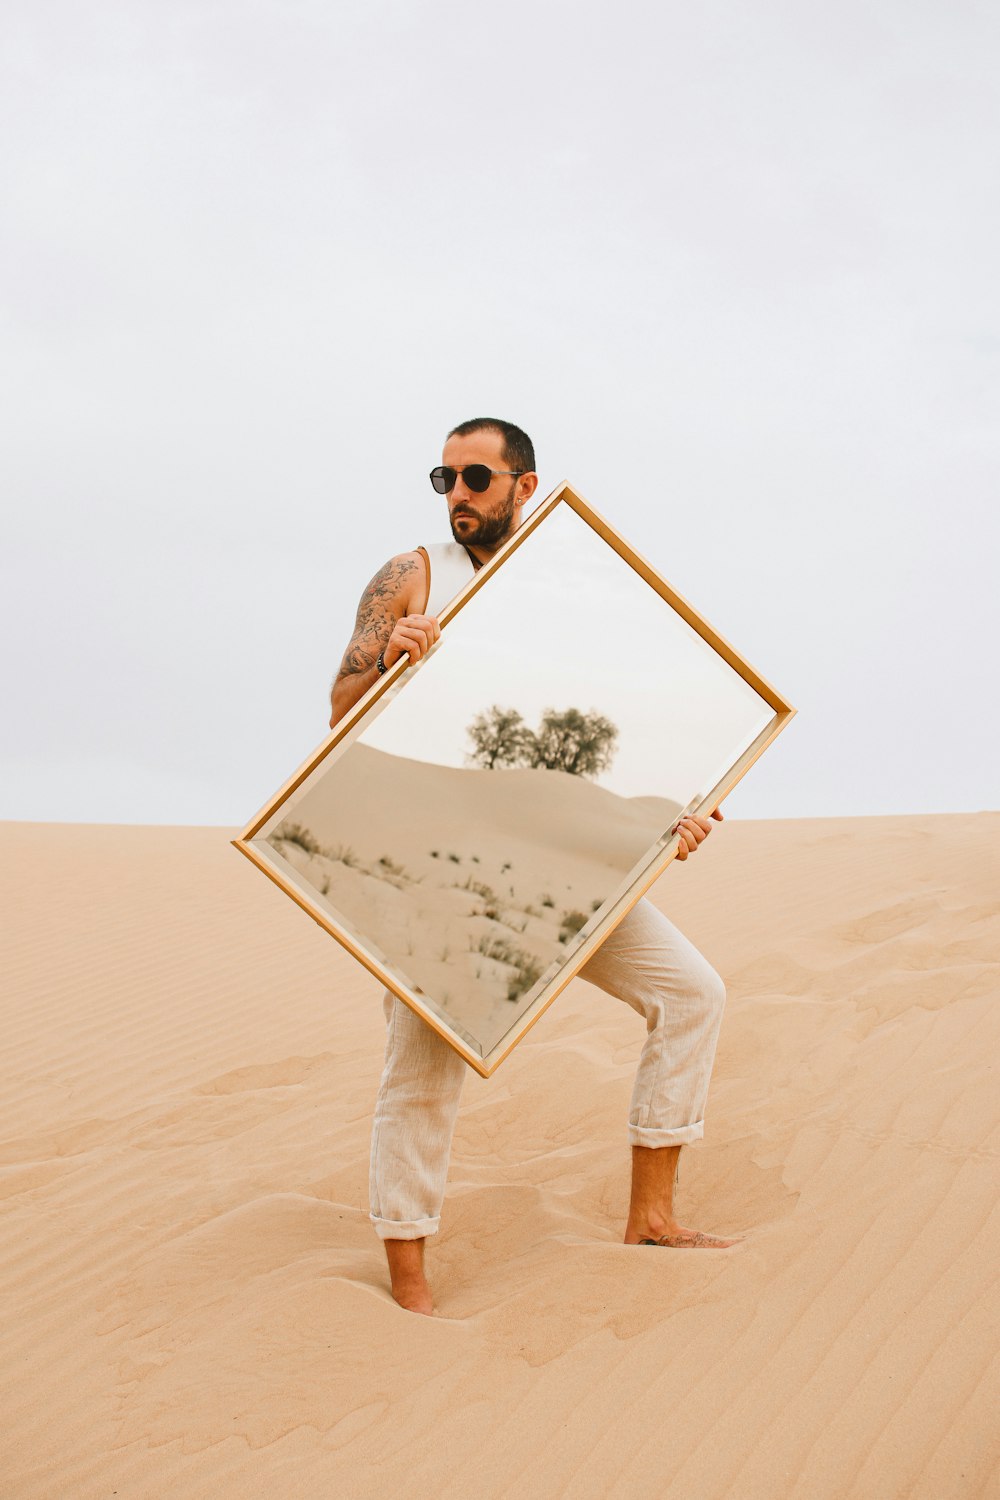 a man holding a picture frame in the desert